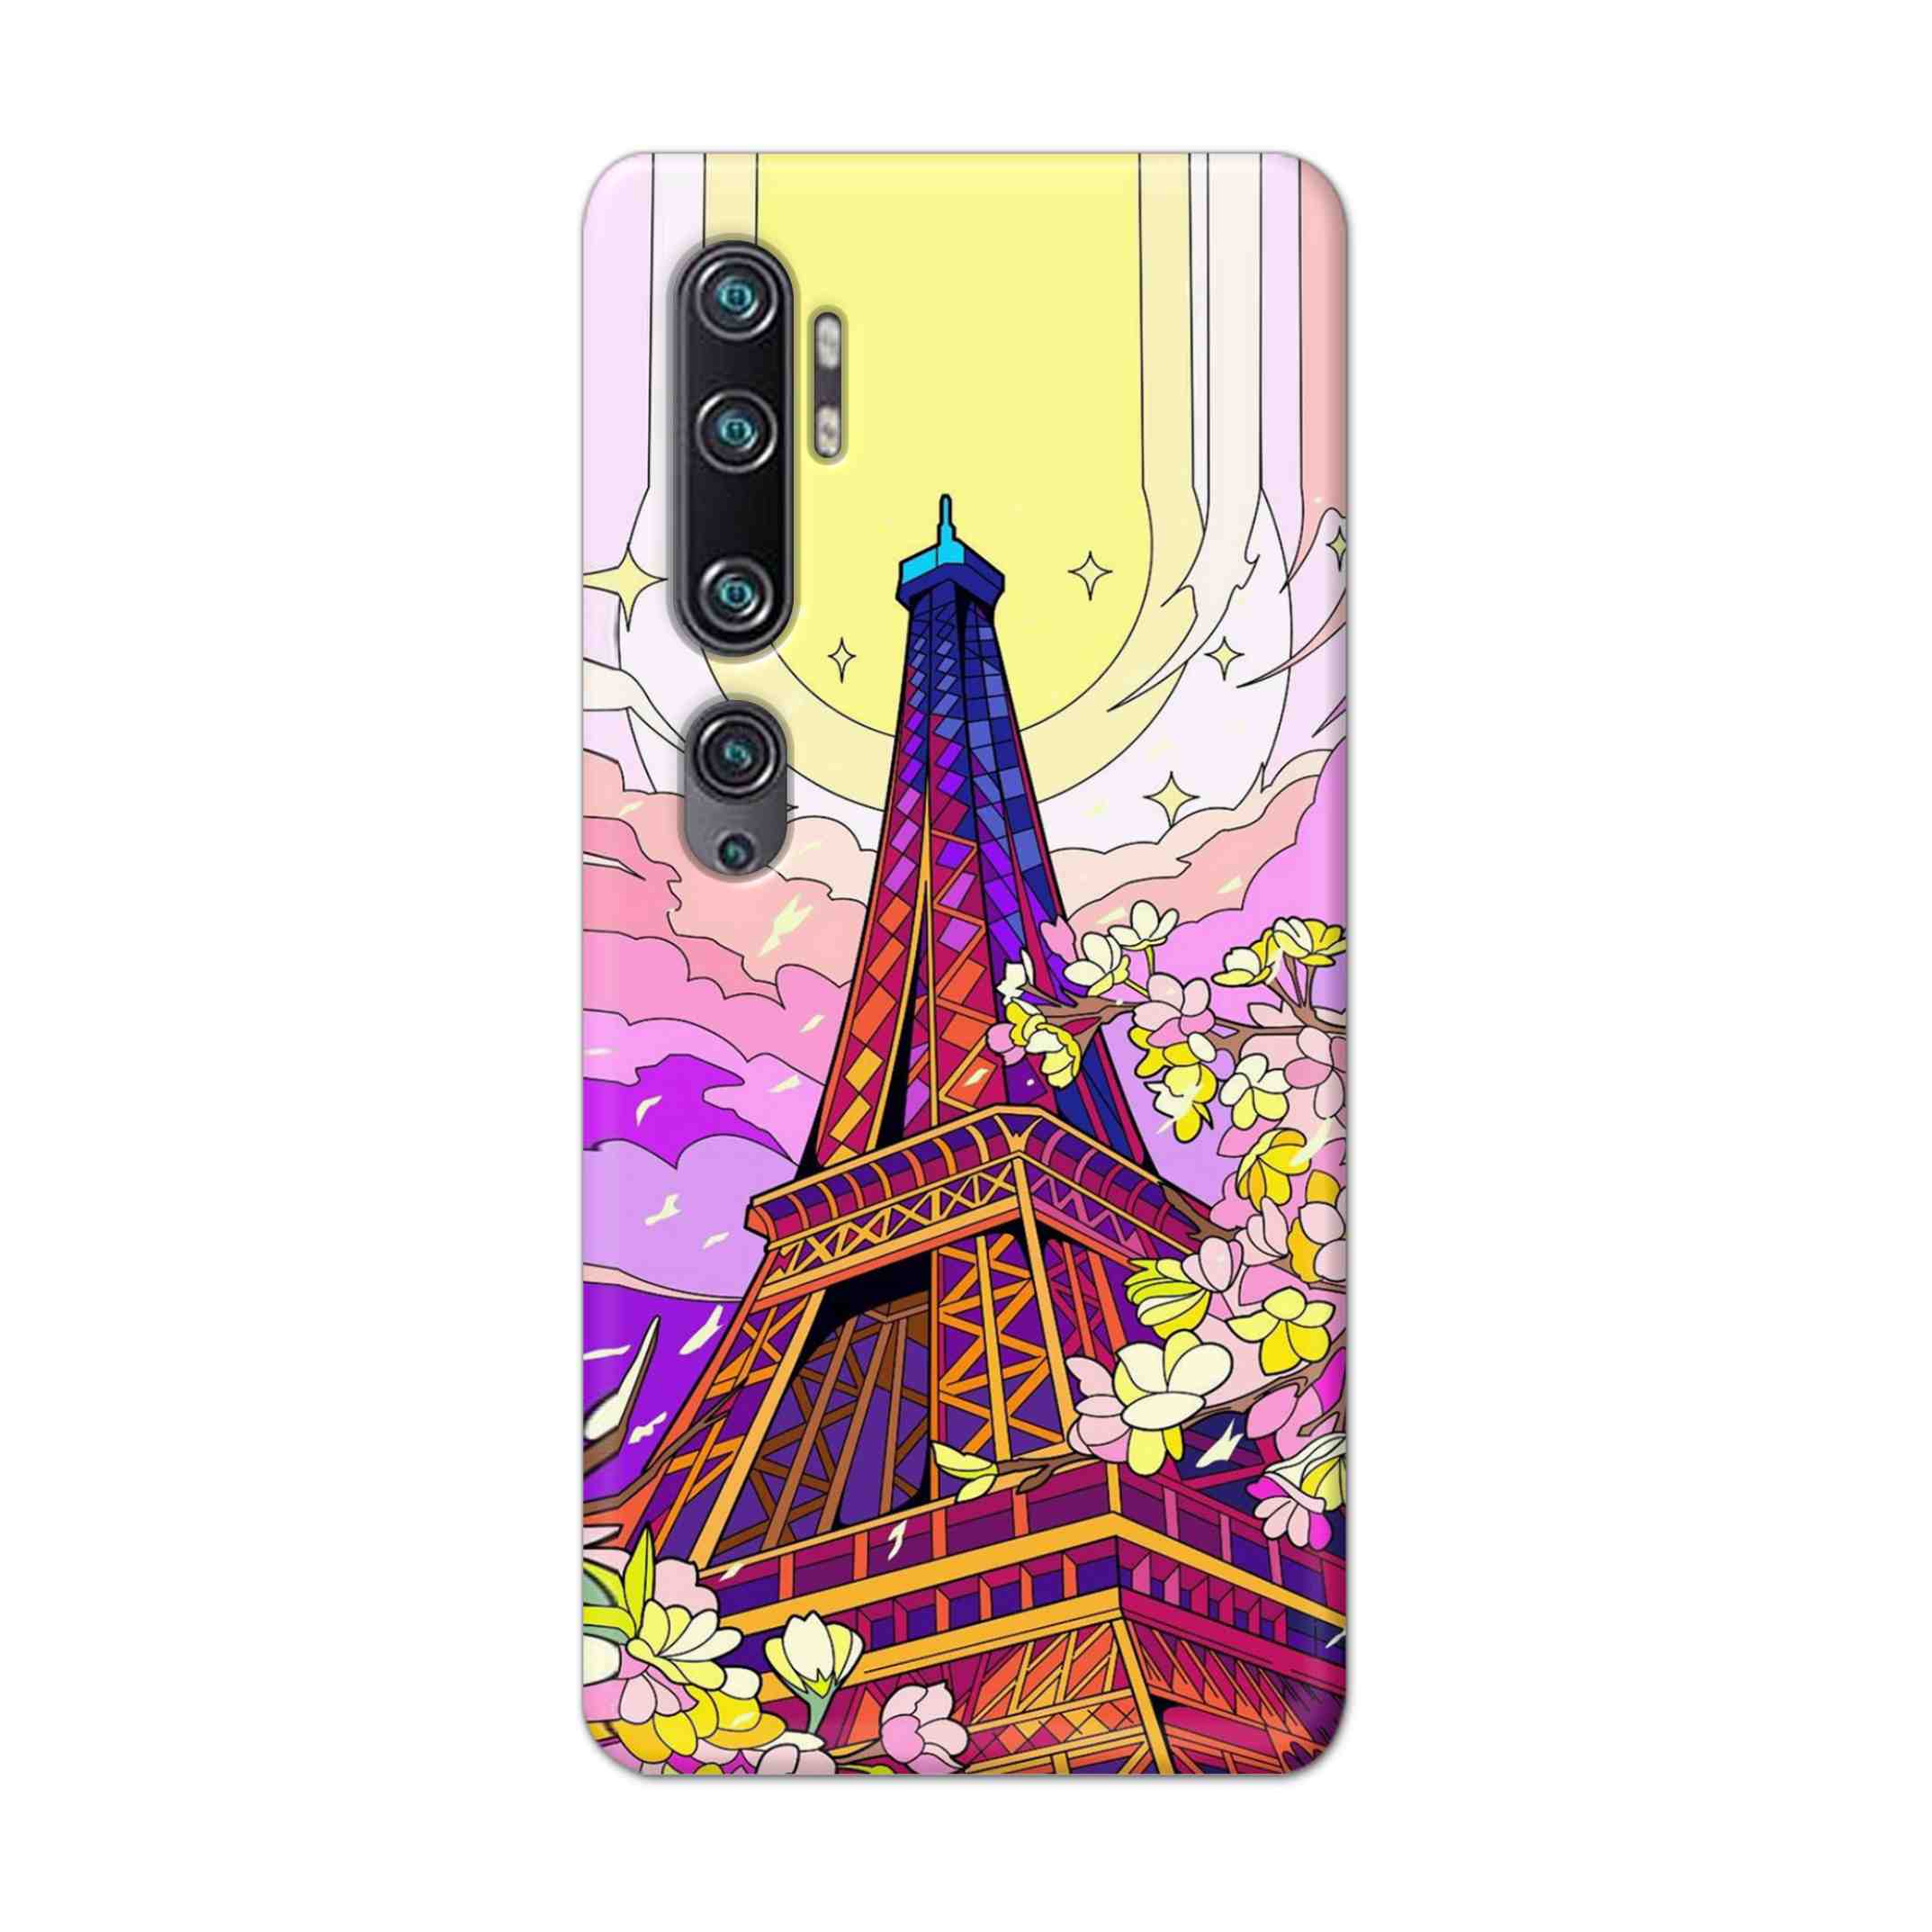 Buy Eiffel Tower Hard Back Mobile Phone Case Cover For Xiaomi Mi Note 10 Online